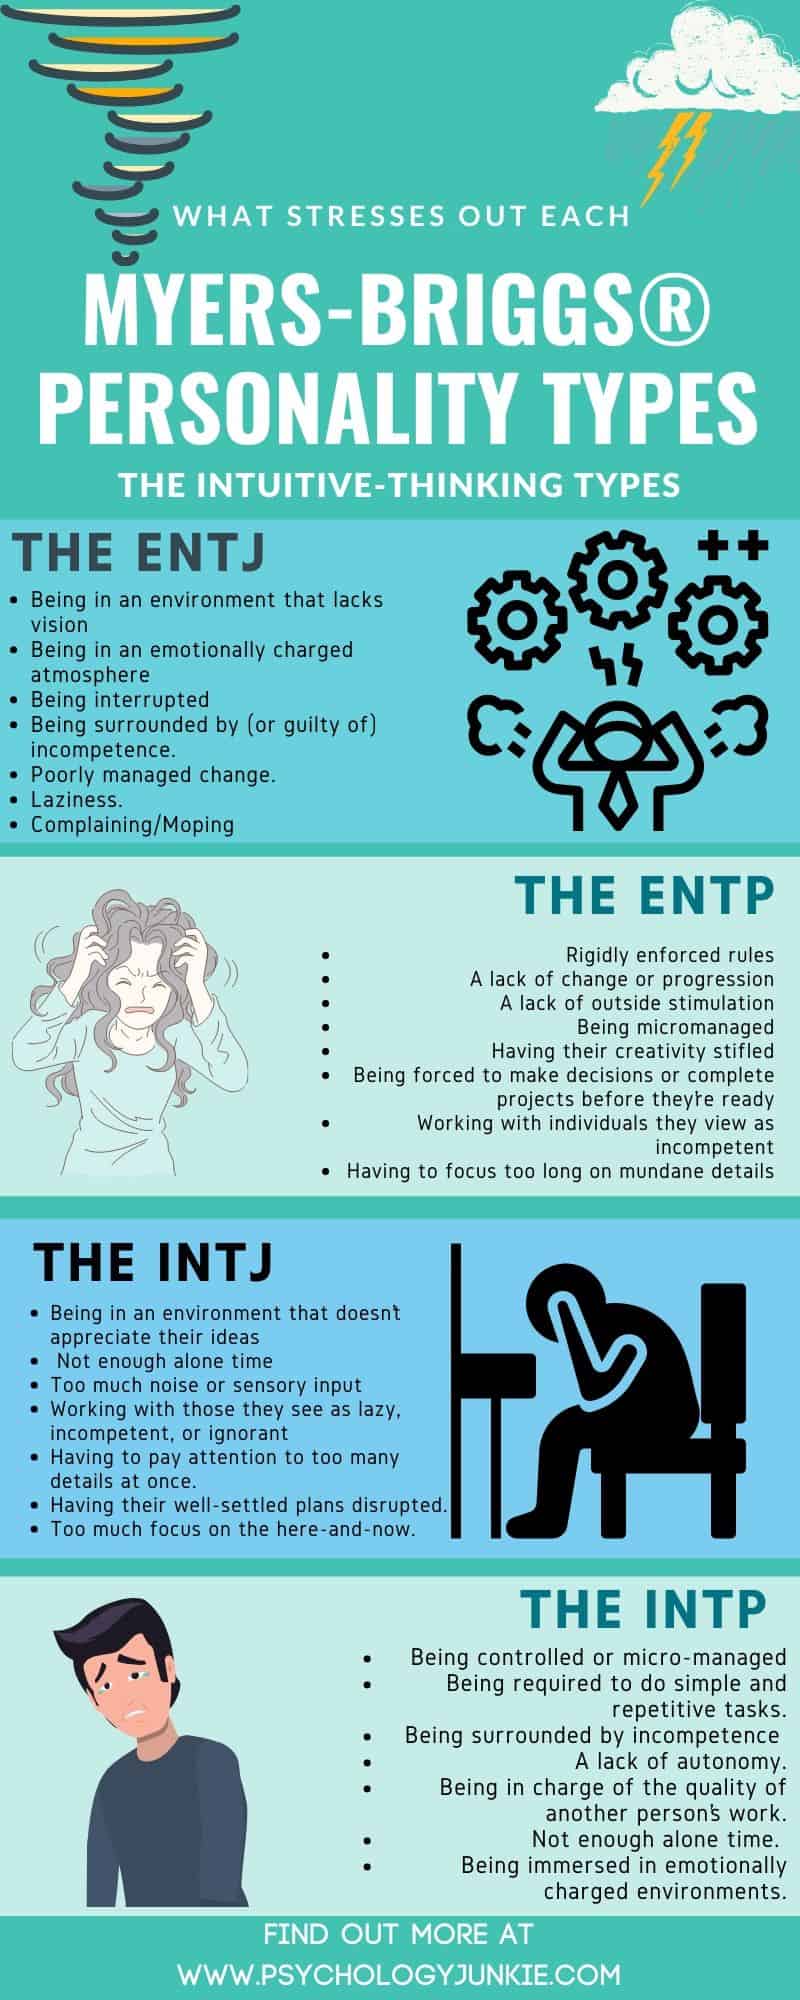 The Noise MBTI Personality Type: ENTP or ENTJ?